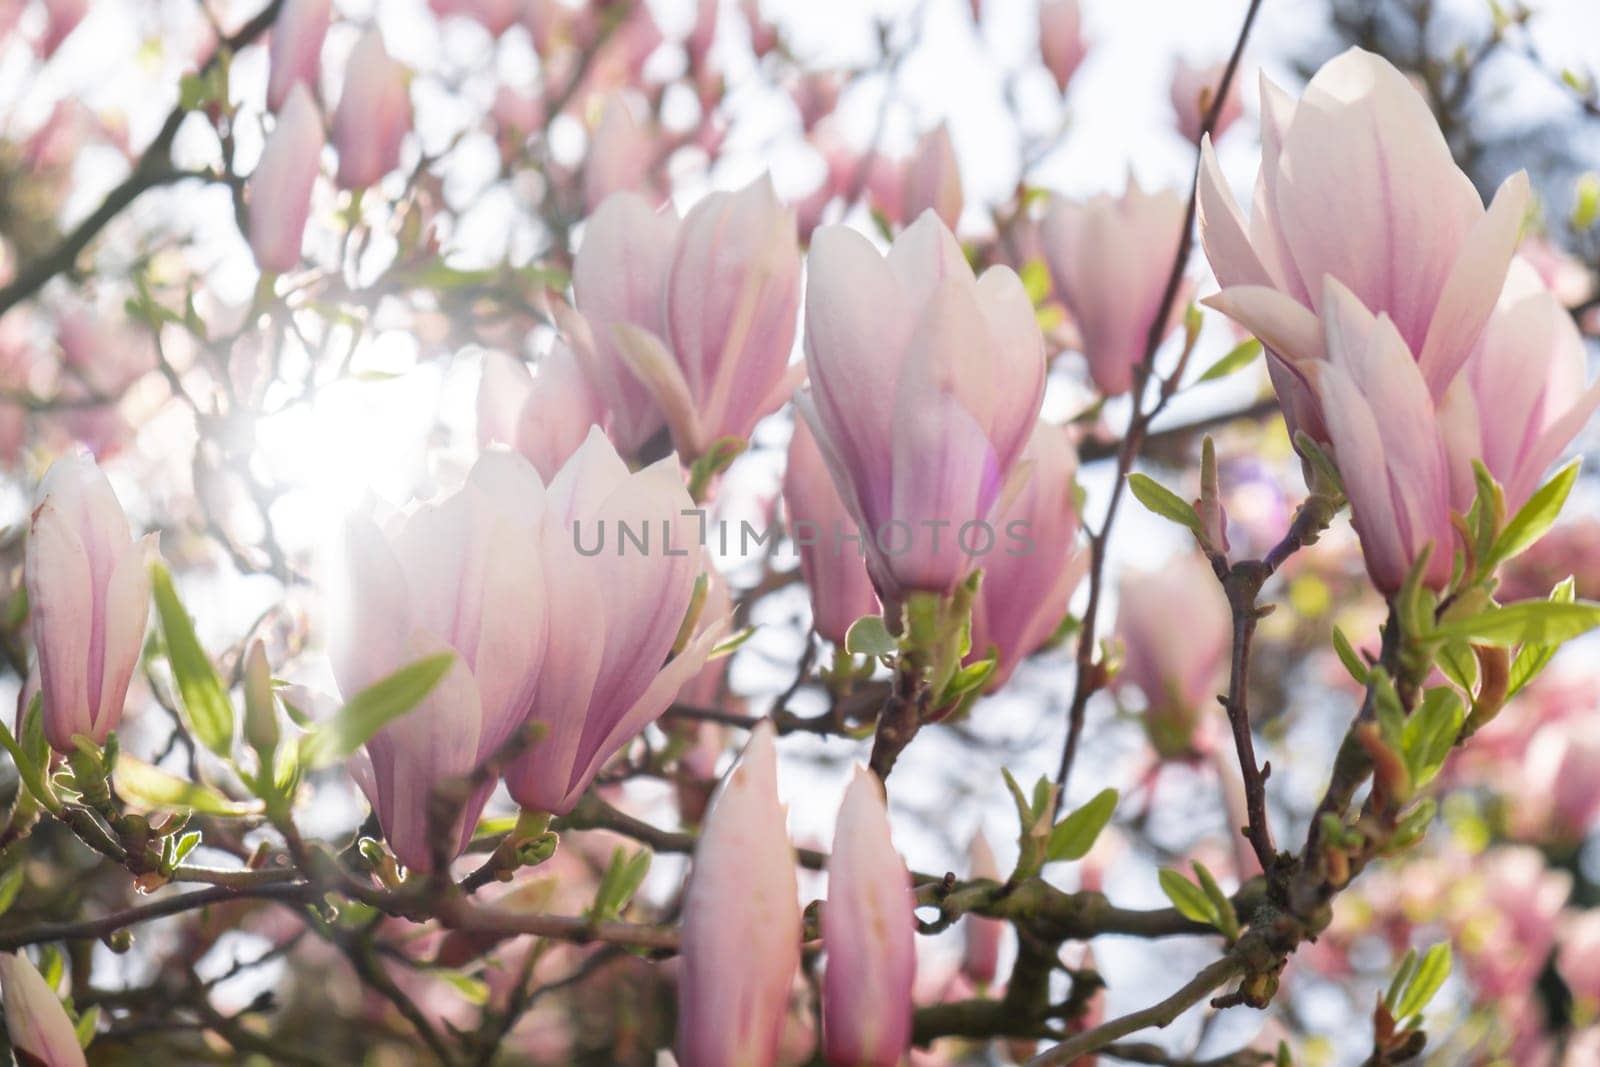 Sulange magnolia close-up on tree branch. Blossom pink magnolia in springtime. Pink Chinese or saucer magnolia flowers tree. Tender pink and white flowers nature background